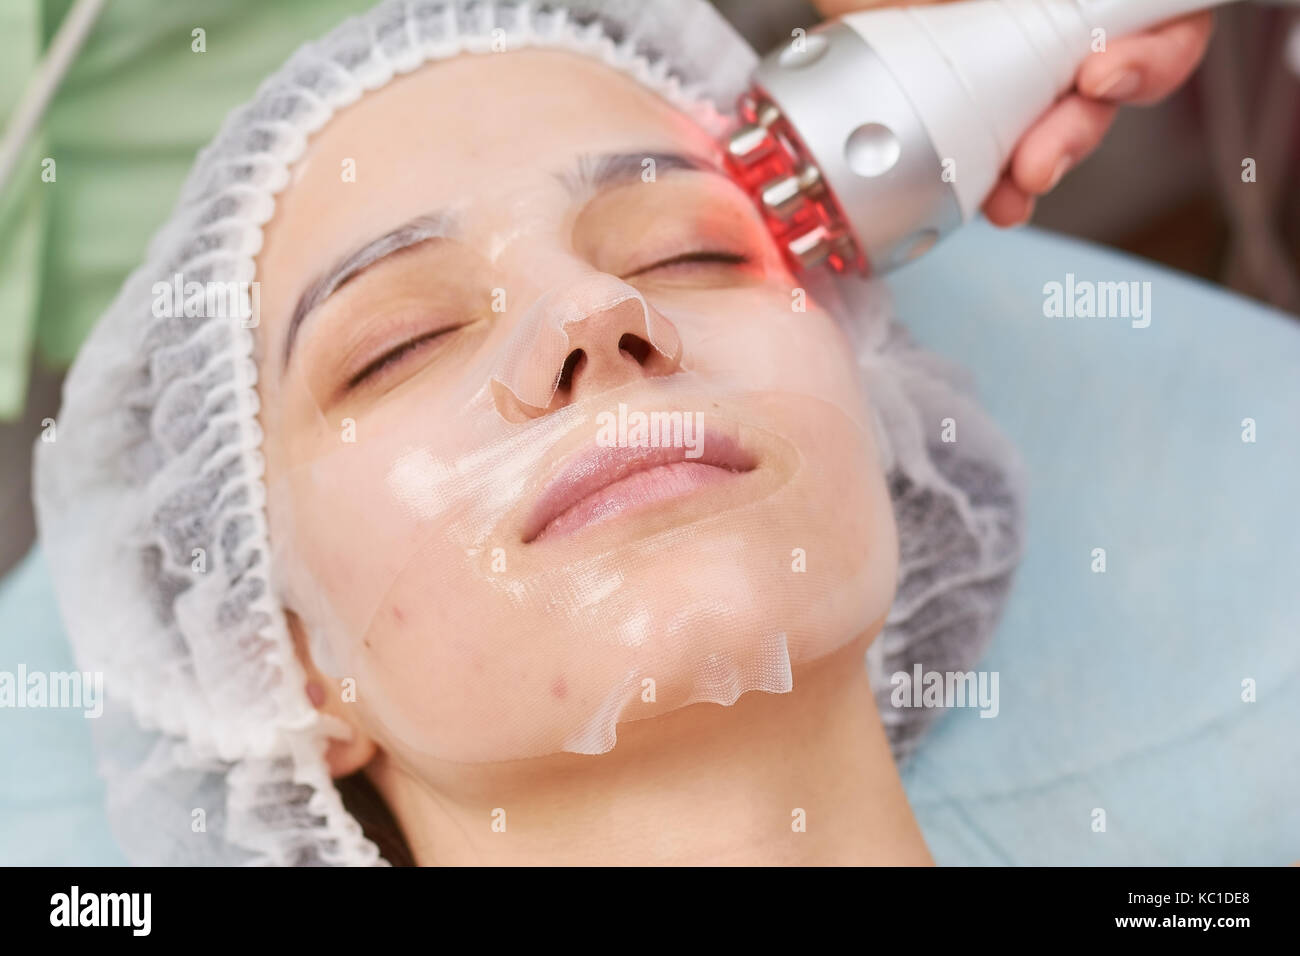 Facial hydrogel mask close up. Stock Photo